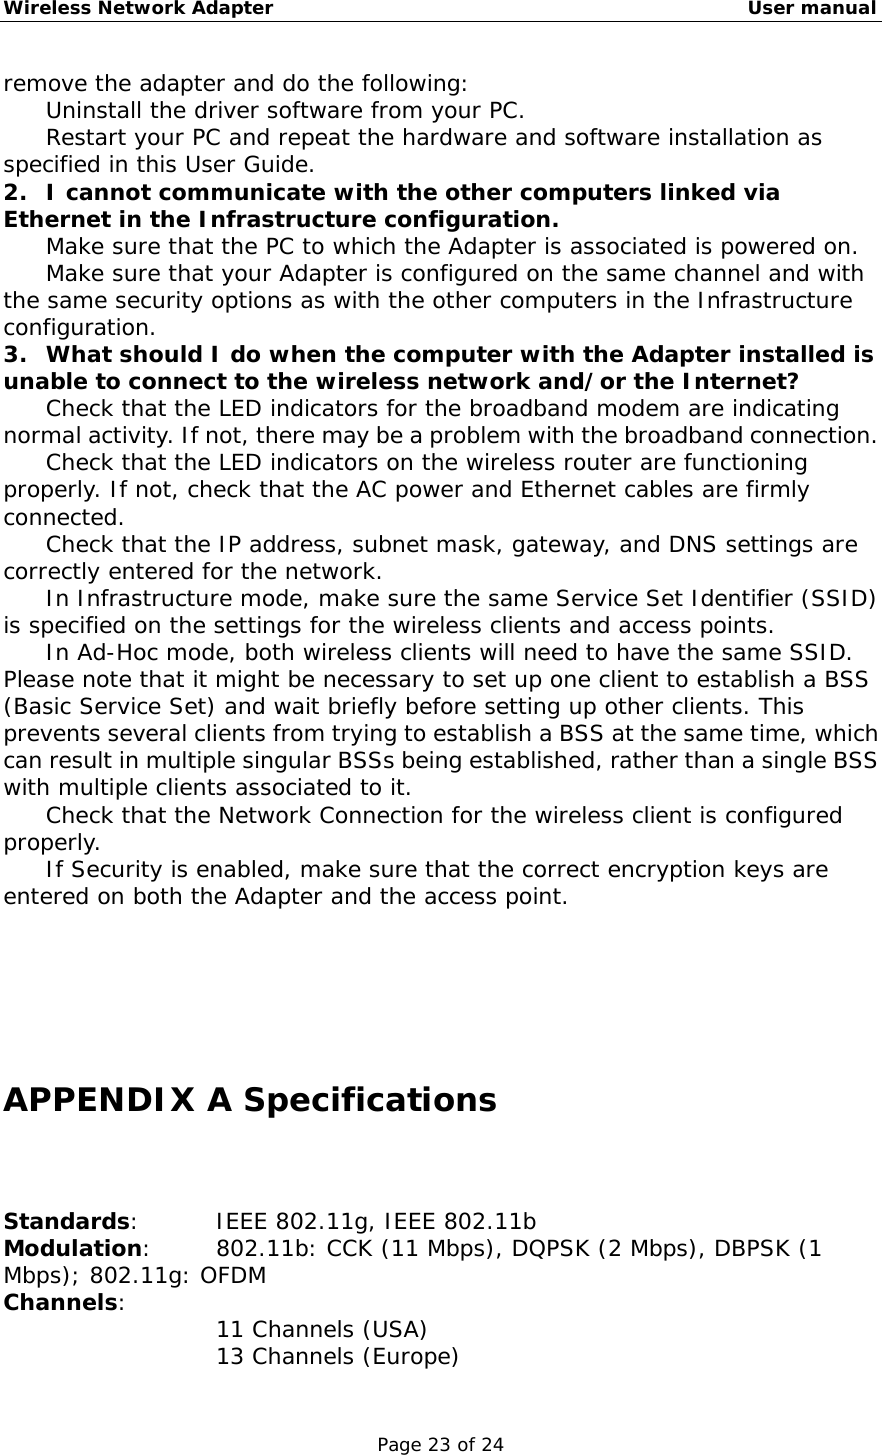 Wireless Network Adapter                                                    User manual Page 23 of 24 remove the adapter and do the following: 　  Uninstall the driver software from your PC. 　  Restart your PC and repeat the hardware and software installation as specified in this User Guide. 2.  I cannot communicate with the other computers linked via Ethernet in the Infrastructure configuration. 　  Make sure that the PC to which the Adapter is associated is powered on. 　  Make sure that your Adapter is configured on the same channel and with the same security options as with the other computers in the Infrastructure configuration. 3.  What should I do when the computer with the Adapter installed is unable to connect to the wireless network and/or the Internet? 　  Check that the LED indicators for the broadband modem are indicating normal activity. If not, there may be a problem with the broadband connection. 　  Check that the LED indicators on the wireless router are functioning properly. If not, check that the AC power and Ethernet cables are firmly connected. 　  Check that the IP address, subnet mask, gateway, and DNS settings are correctly entered for the network. 　  In Infrastructure mode, make sure the same Service Set Identifier (SSID) is specified on the settings for the wireless clients and access points.  　  In Ad-Hoc mode, both wireless clients will need to have the same SSID. Please note that it might be necessary to set up one client to establish a BSS (Basic Service Set) and wait briefly before setting up other clients. This prevents several clients from trying to establish a BSS at the same time, which can result in multiple singular BSSs being established, rather than a single BSS with multiple clients associated to it.  　  Check that the Network Connection for the wireless client is configured properly.  　  If Security is enabled, make sure that the correct encryption keys are entered on both the Adapter and the access point.      APPENDIX A Specifications Standards:     IEEE 802.11g, IEEE 802.11b Modulation:    802.11b: CCK (11 Mbps), DQPSK (2 Mbps), DBPSK (1 Mbps); 802.11g: OFDM Channels:  11 Channels (USA) 13 Channels (Europe) 